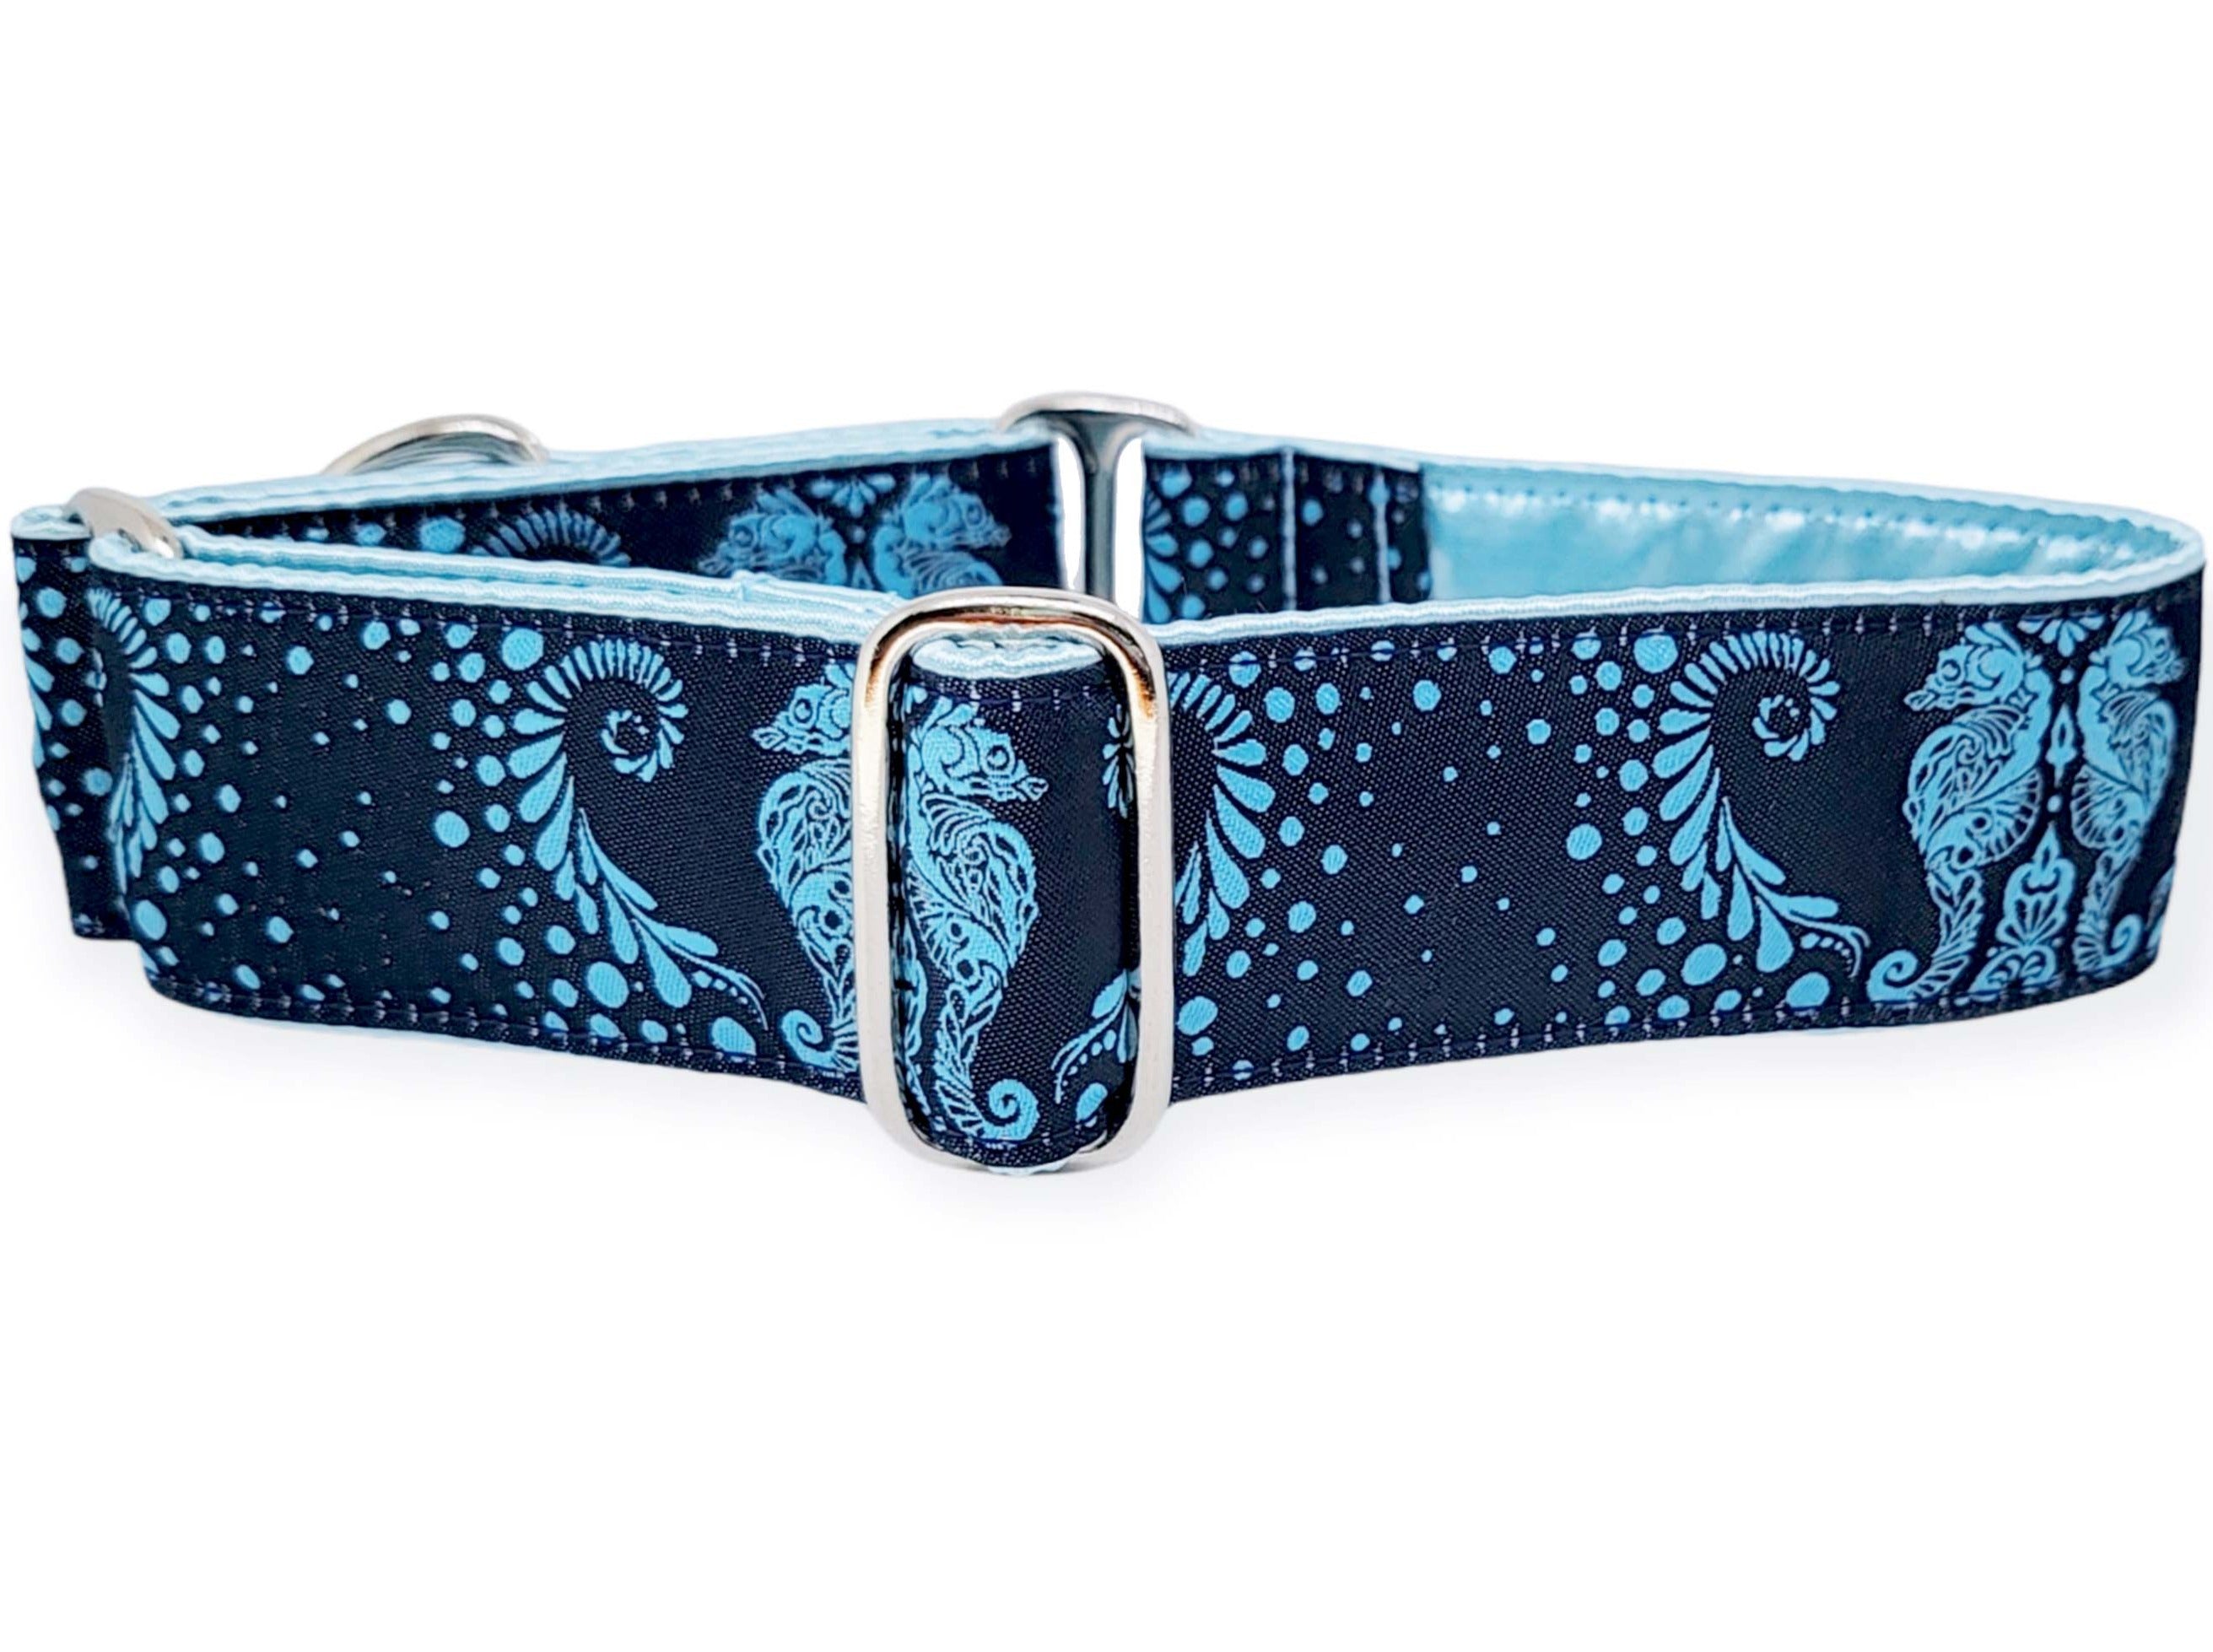 The Hound Haberdashery Collar Seahorses - Martingale or Buckle Dog Collar - 1.5" Width